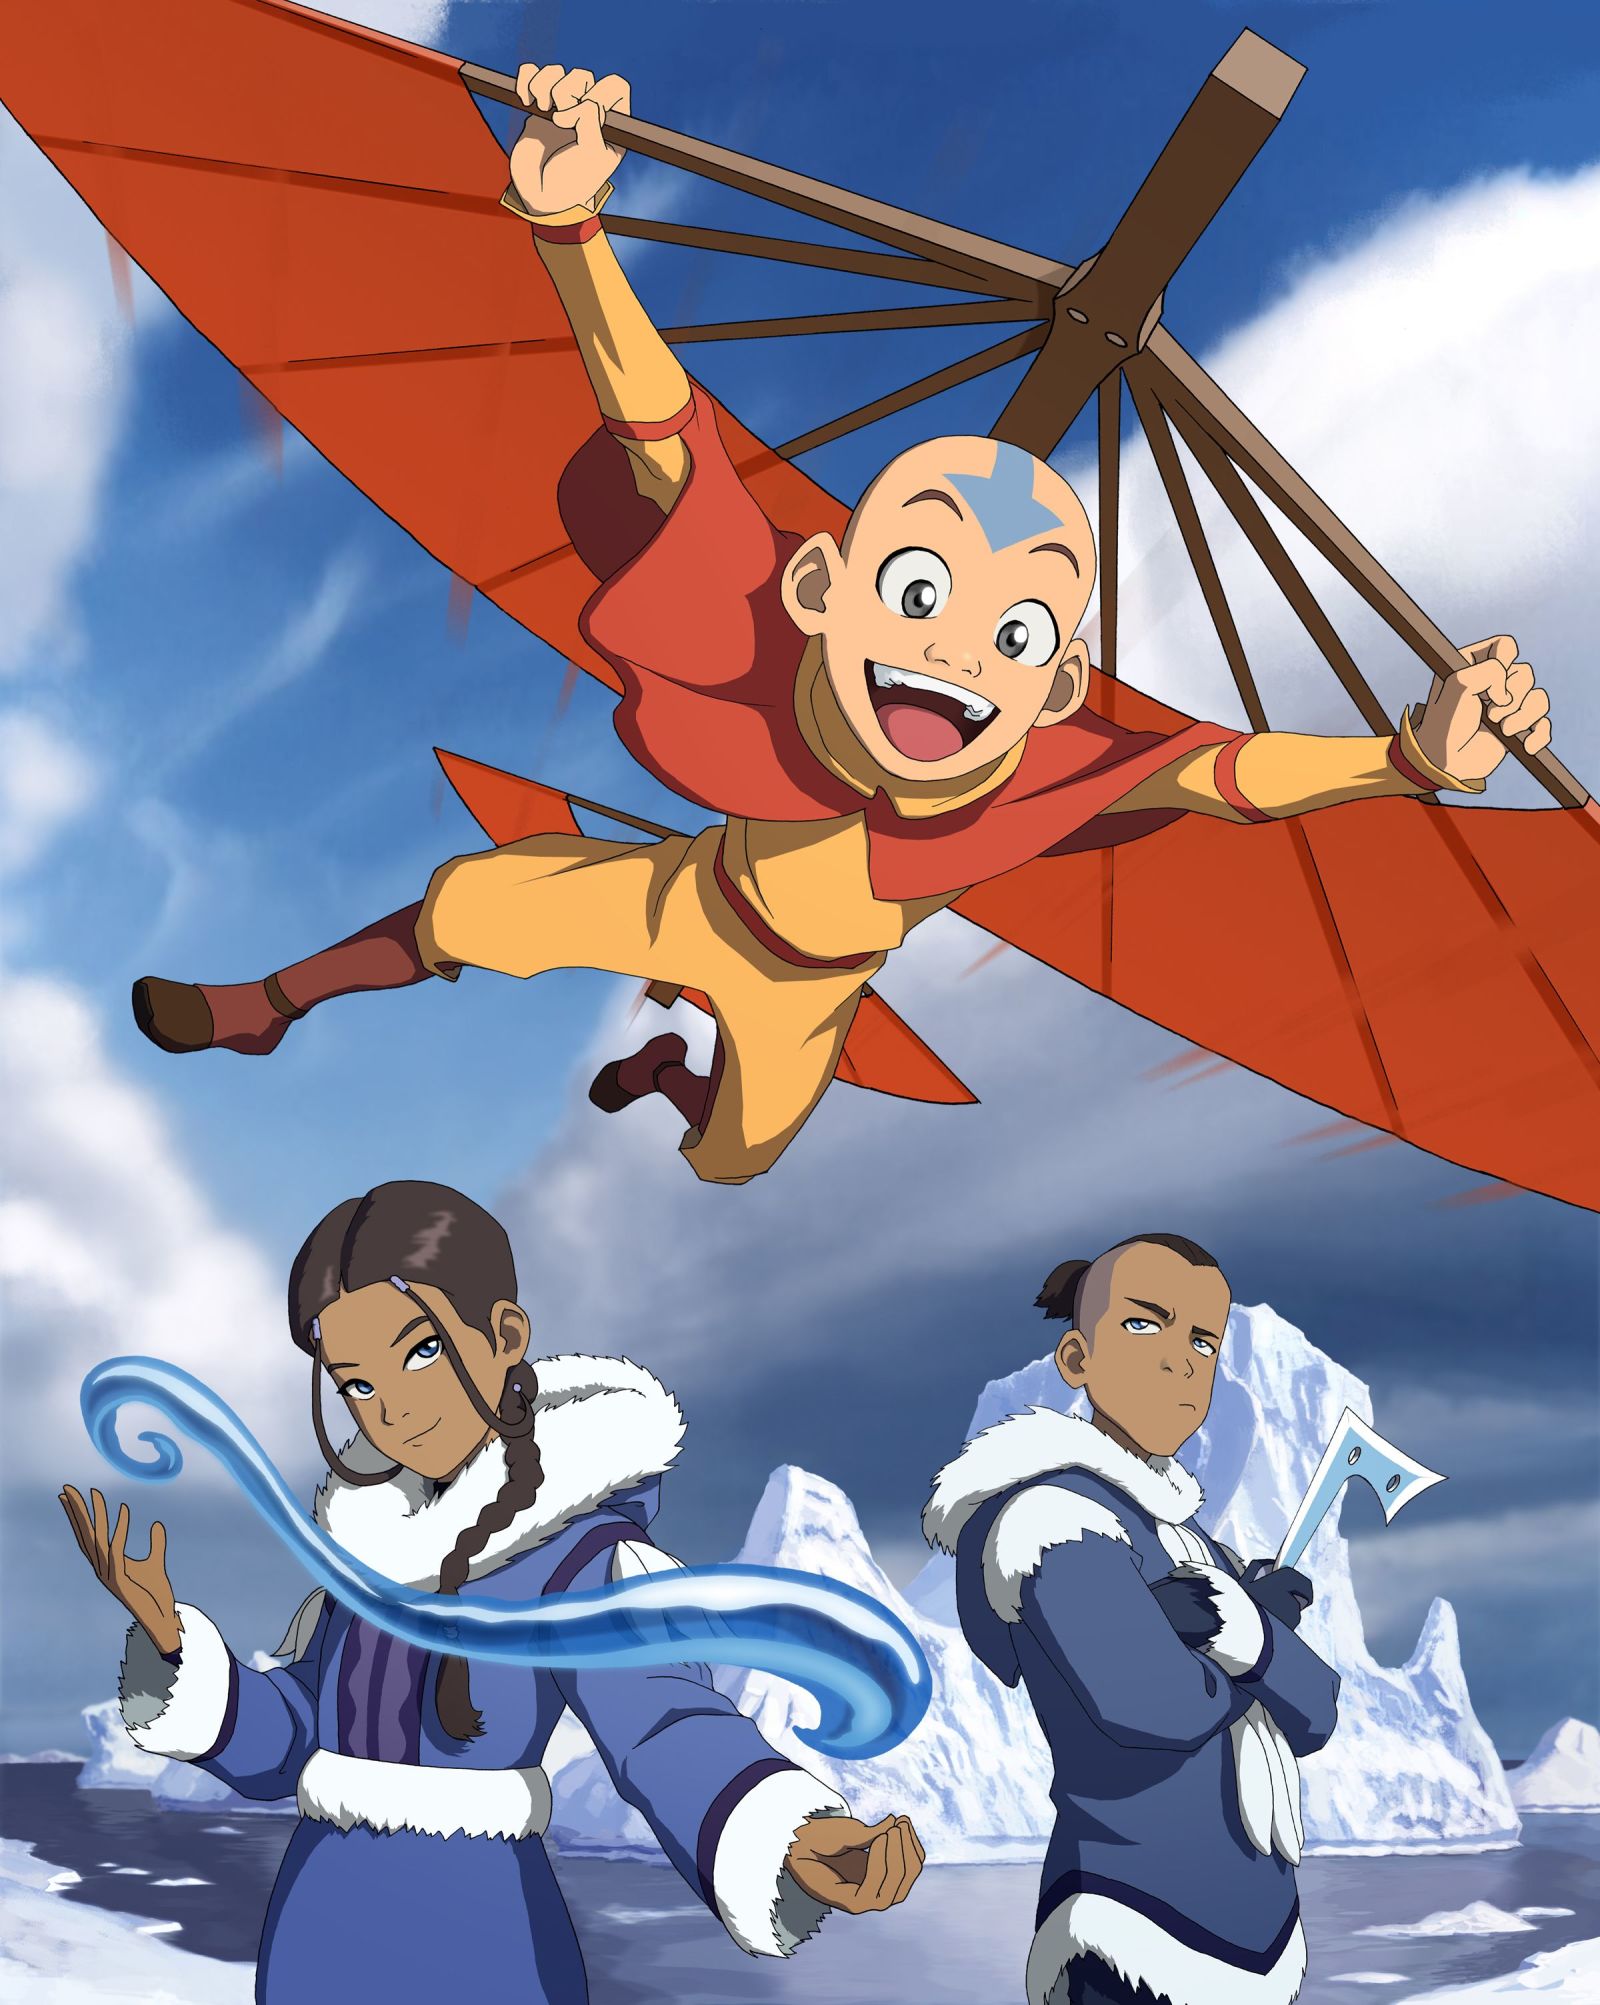 Avatar The Last Airbender Season 4 Was Never Going To Happen